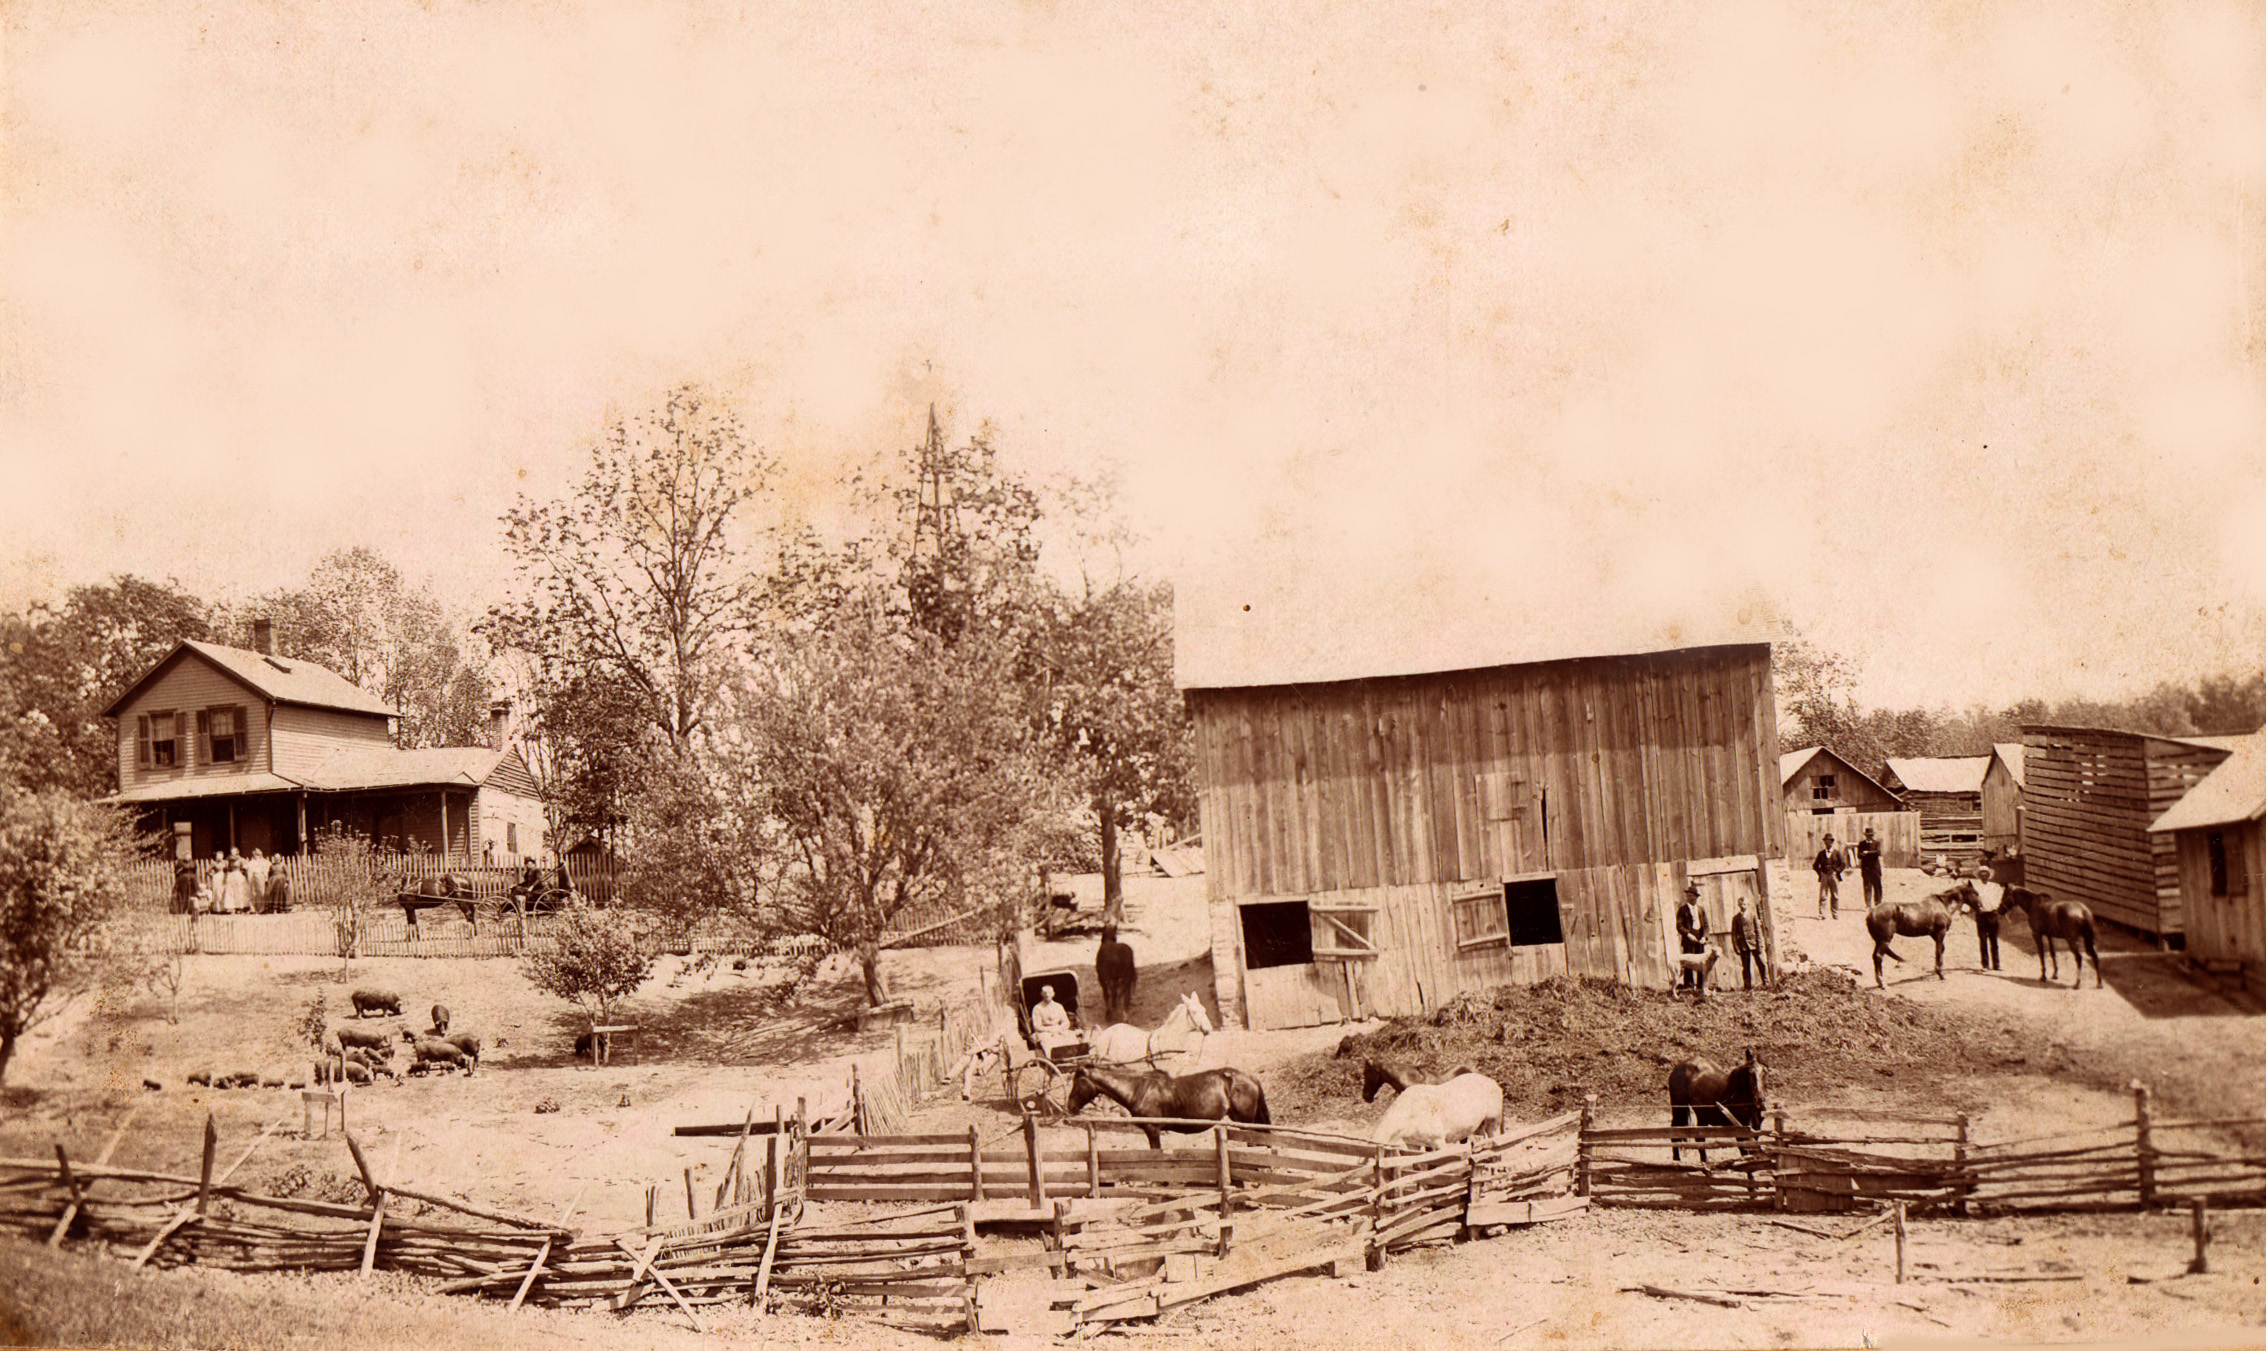 August & Fredericka Buck farmstead home circa late 1890's to early 1900's